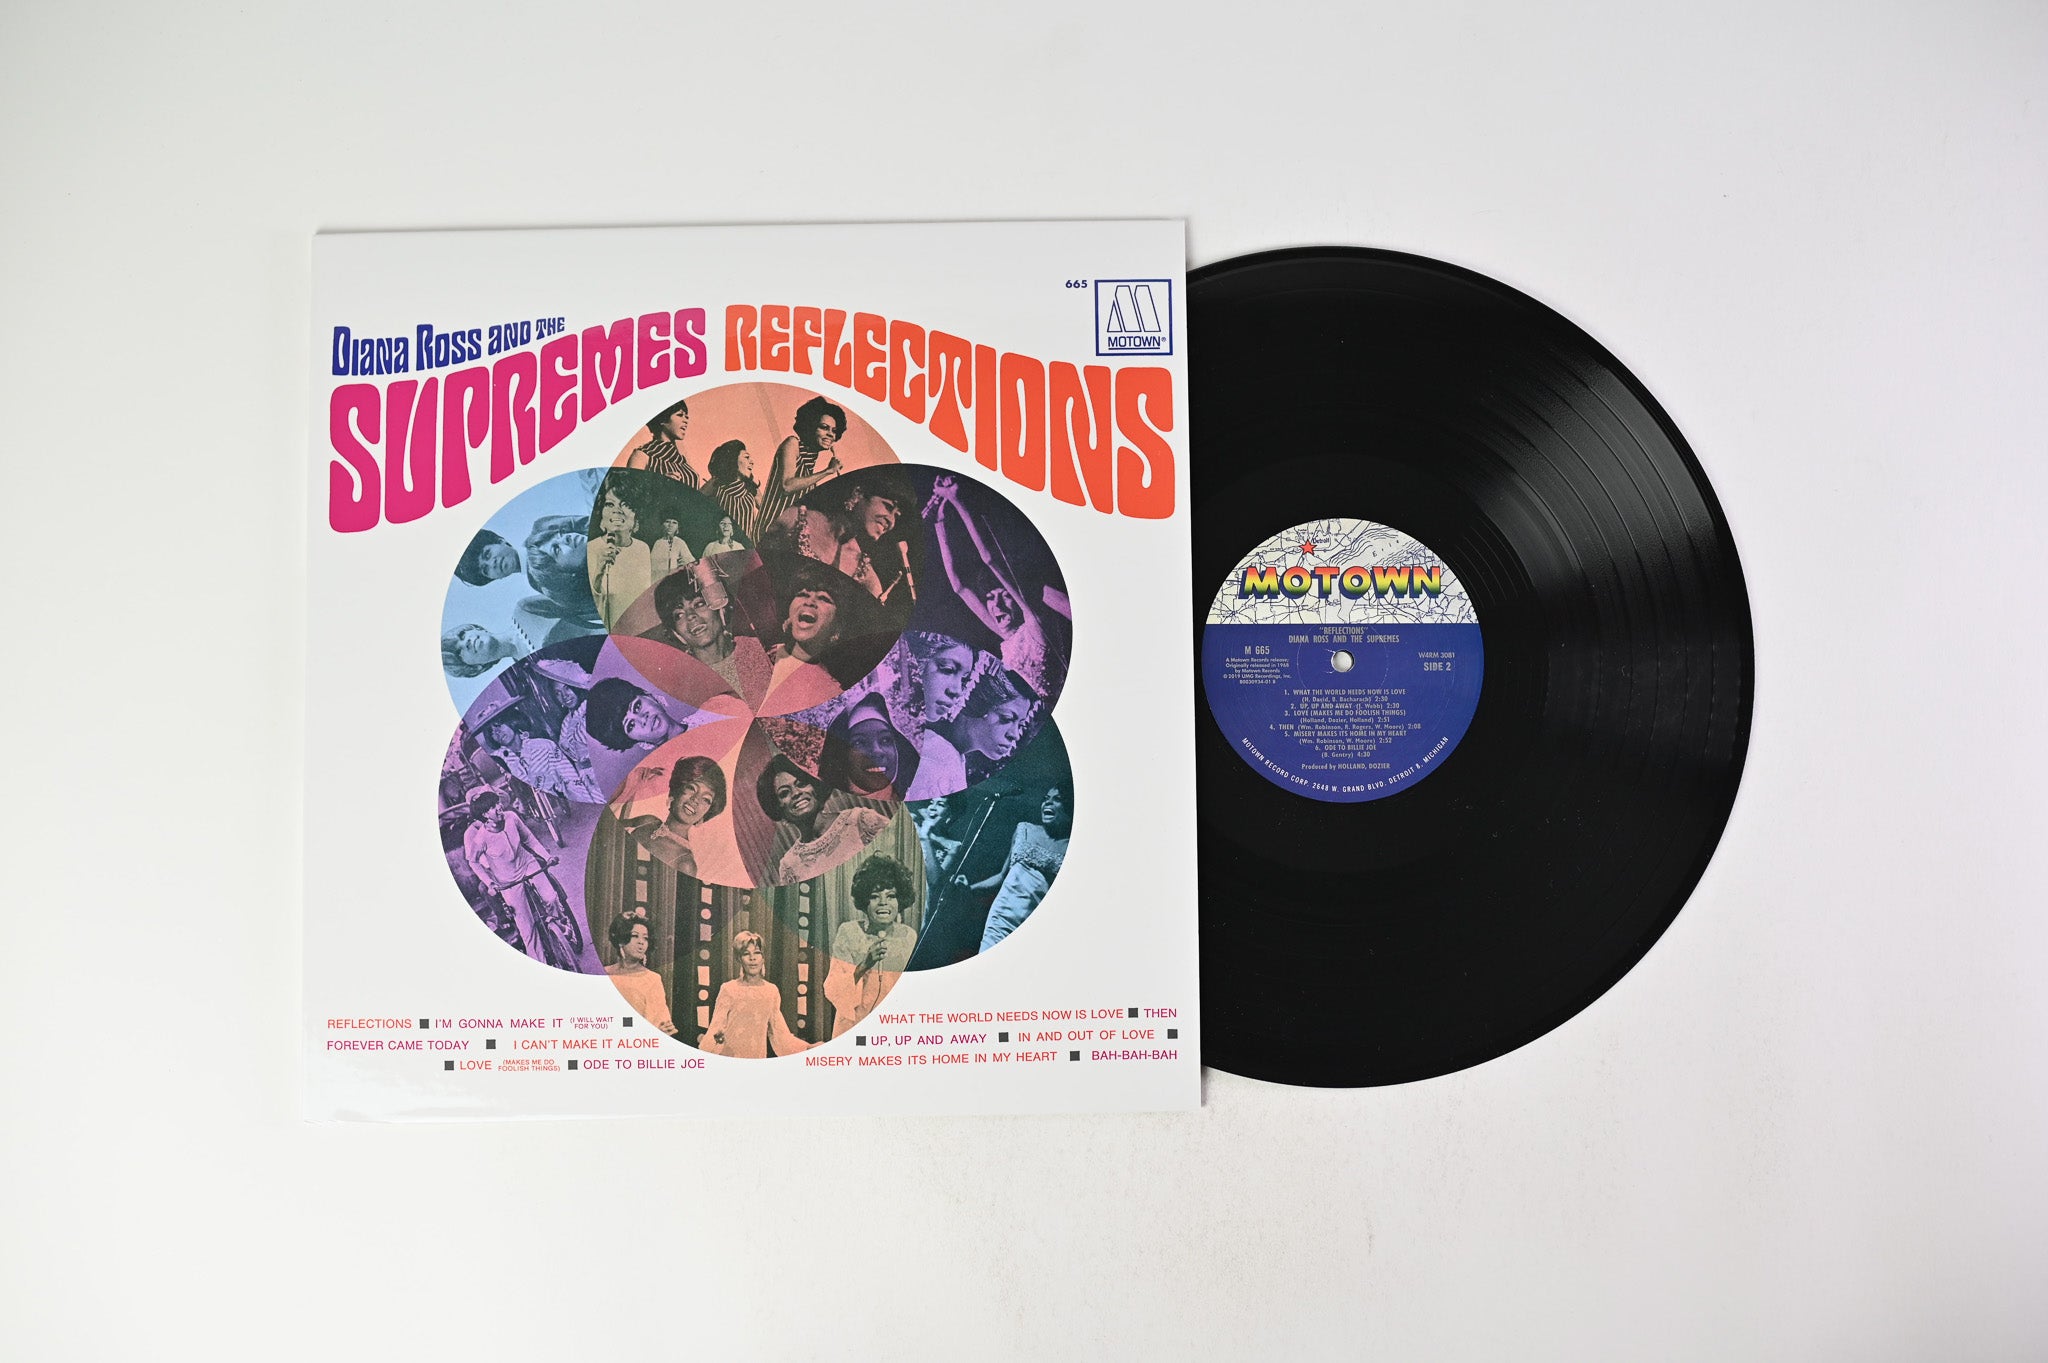 The Supremes - Reflections Mono Reissue on Motown